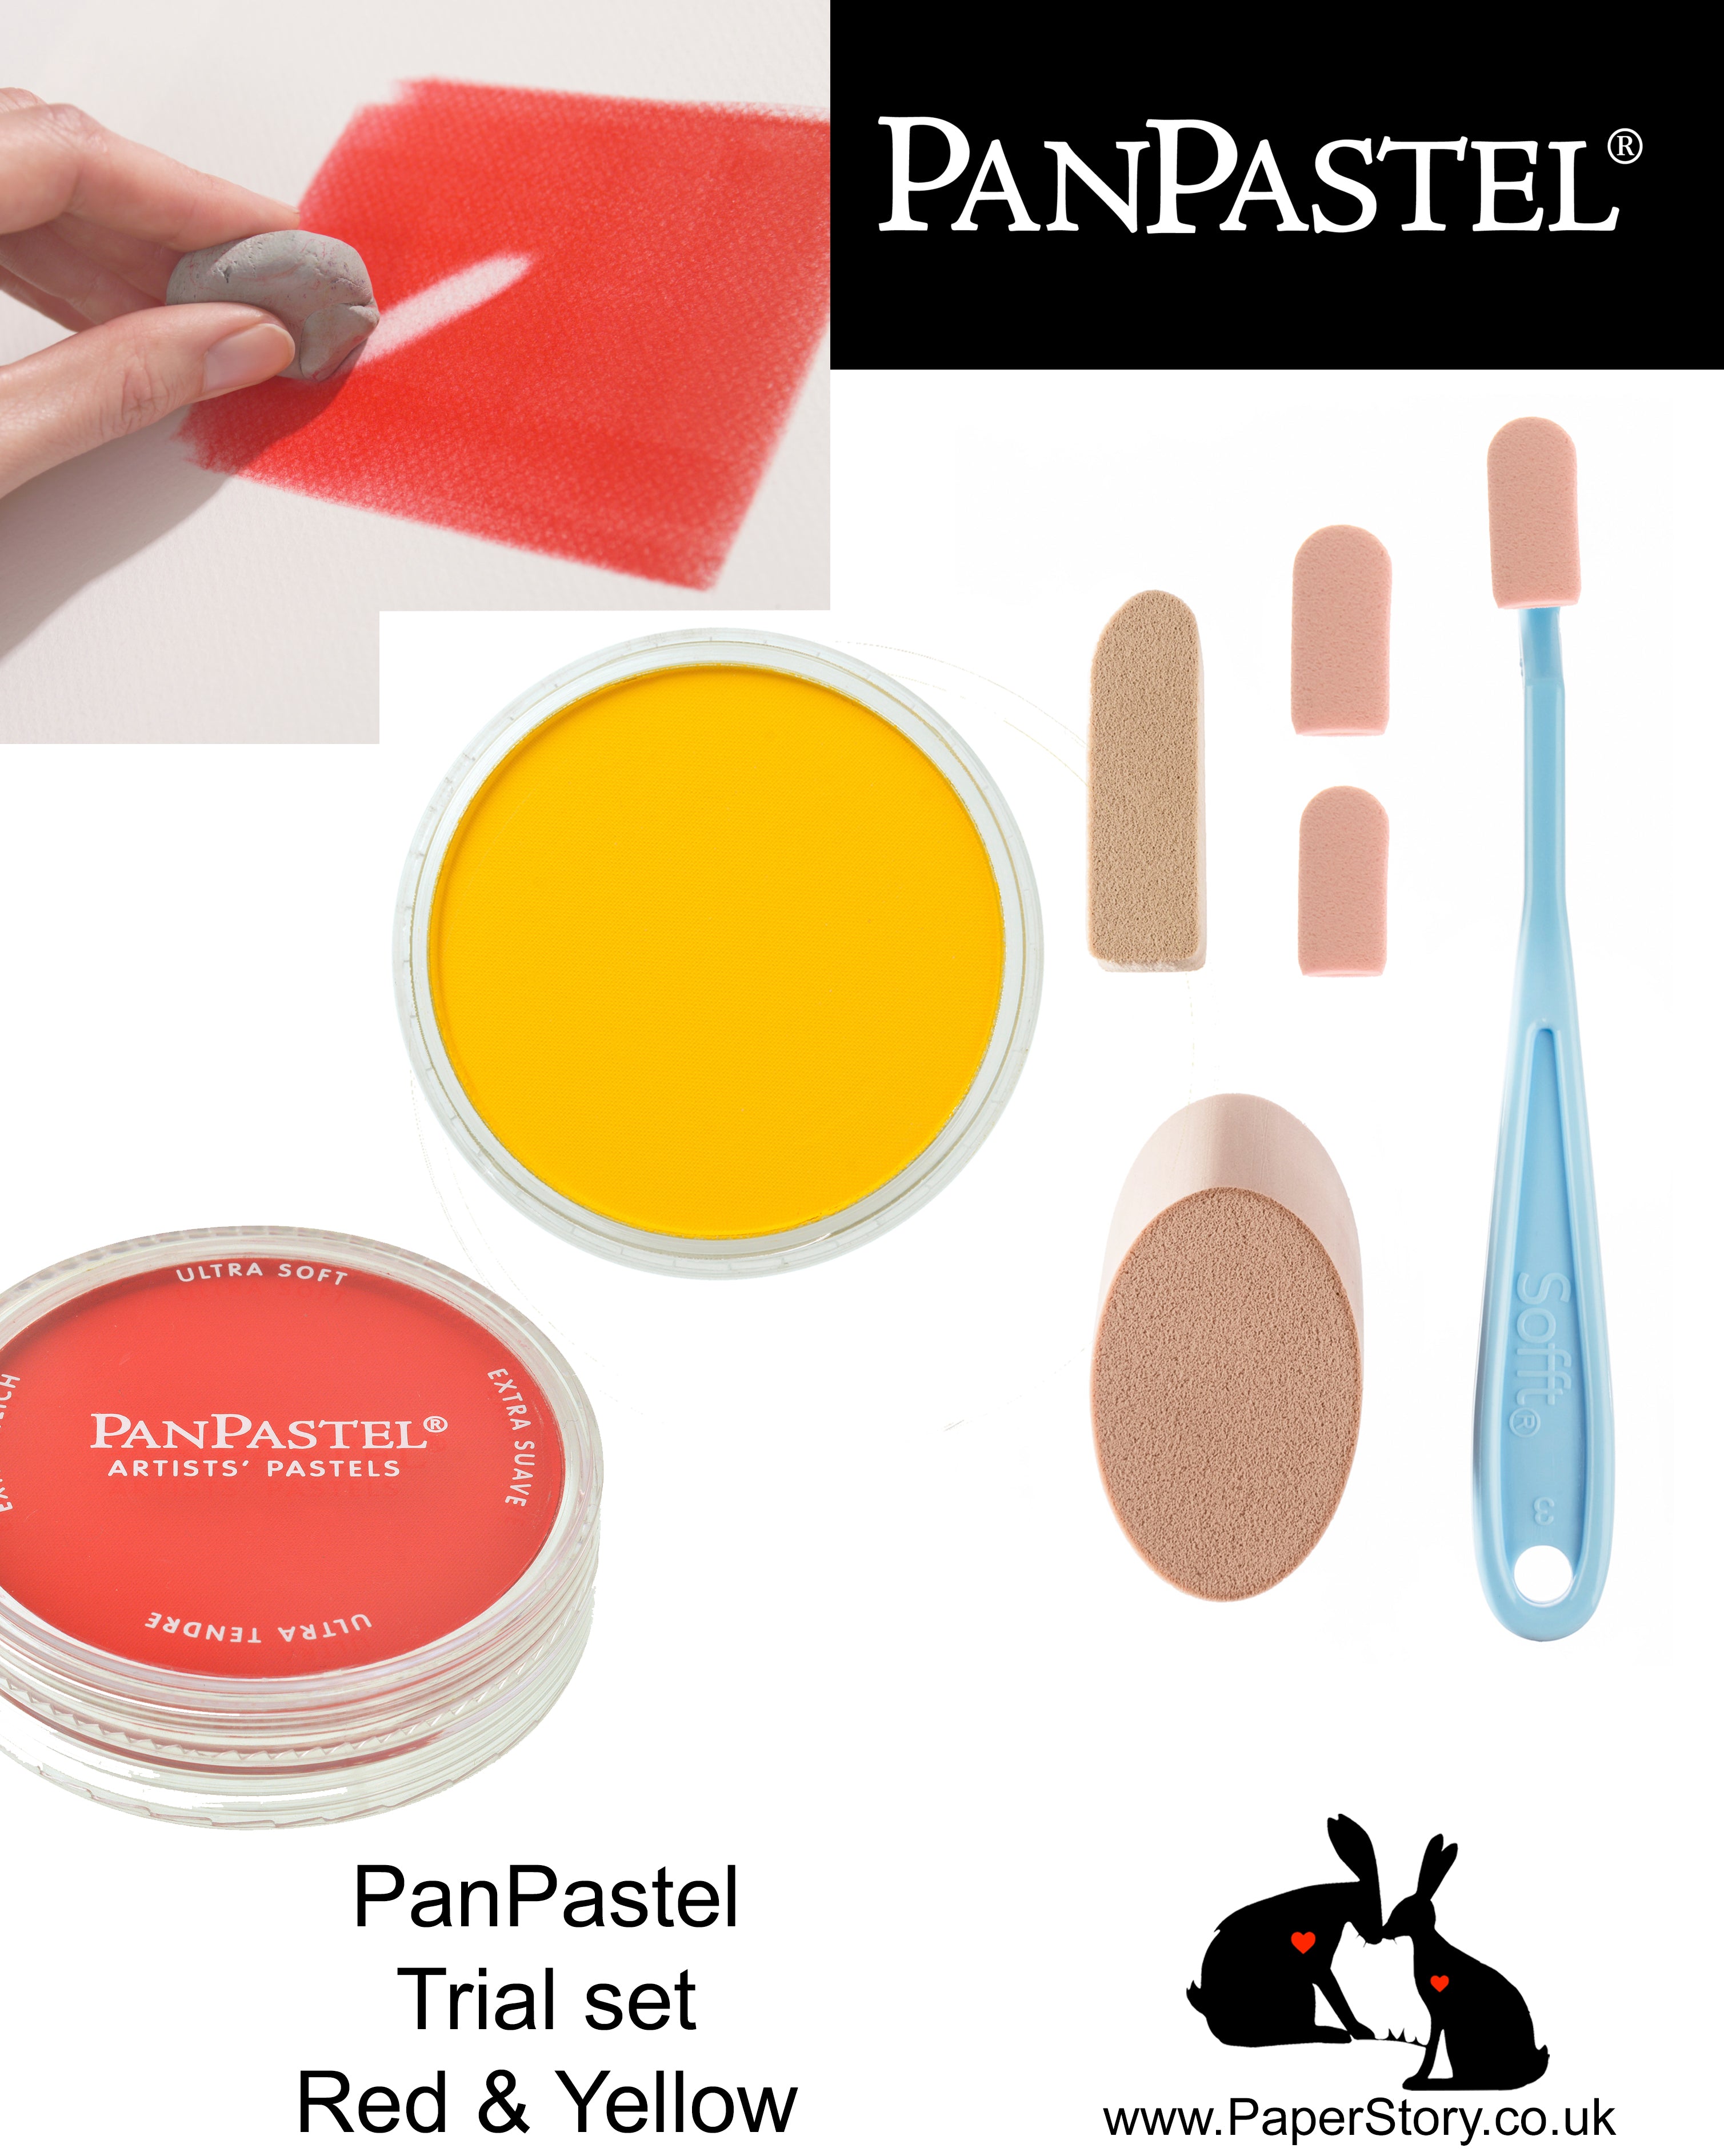 PanPastel trial kit, a perfect way to try PanPastel pans with two complementary colours and a selection of Sofft tools. Includes yellow and red stacking pans.